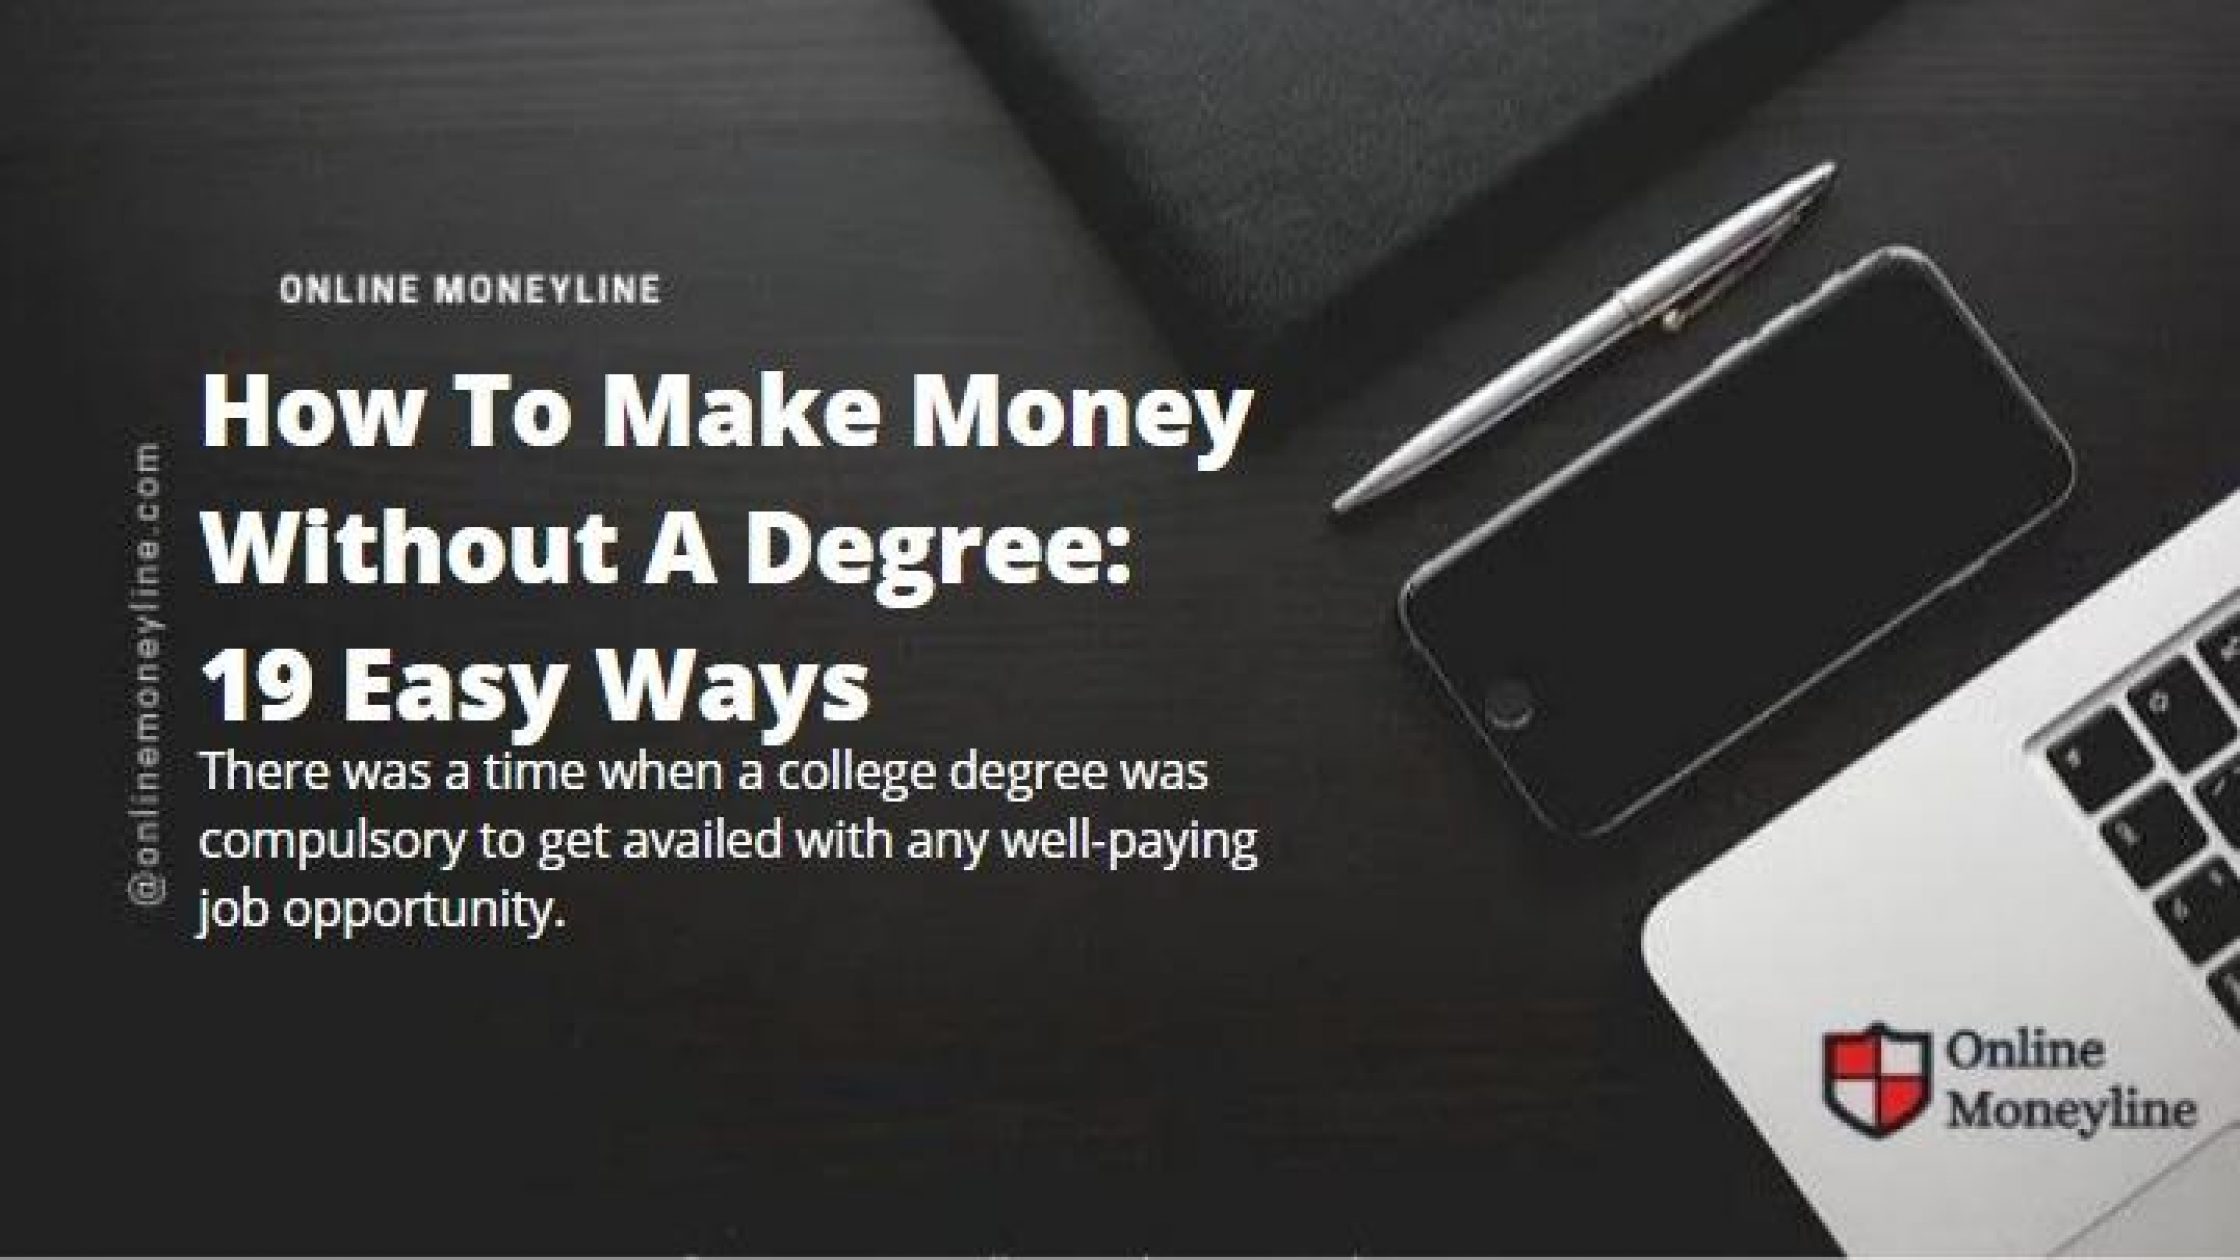 How To Make Money Without A Degree: 19 Easy Ways